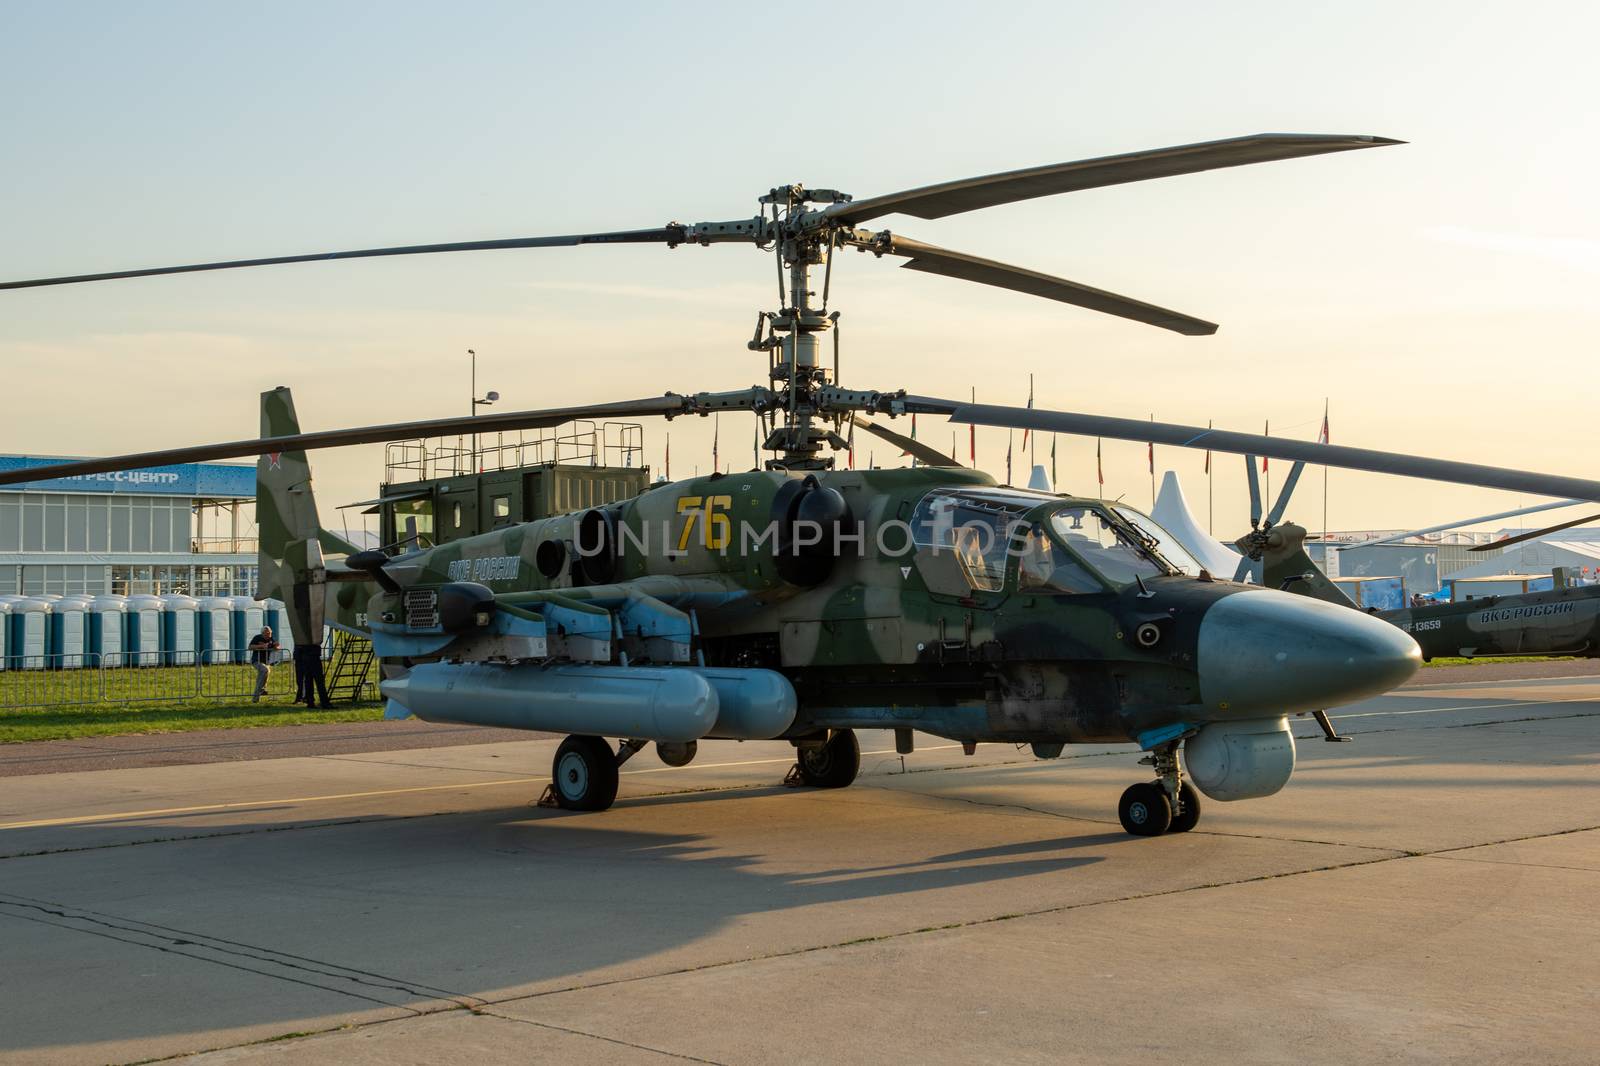 August 30, 2019. Zhukovsky, Russia. Russian reconnaissance and attack helicopter Kamov Ka-52 Alligator at the International Aviation and Space Salon MAKS 2019.